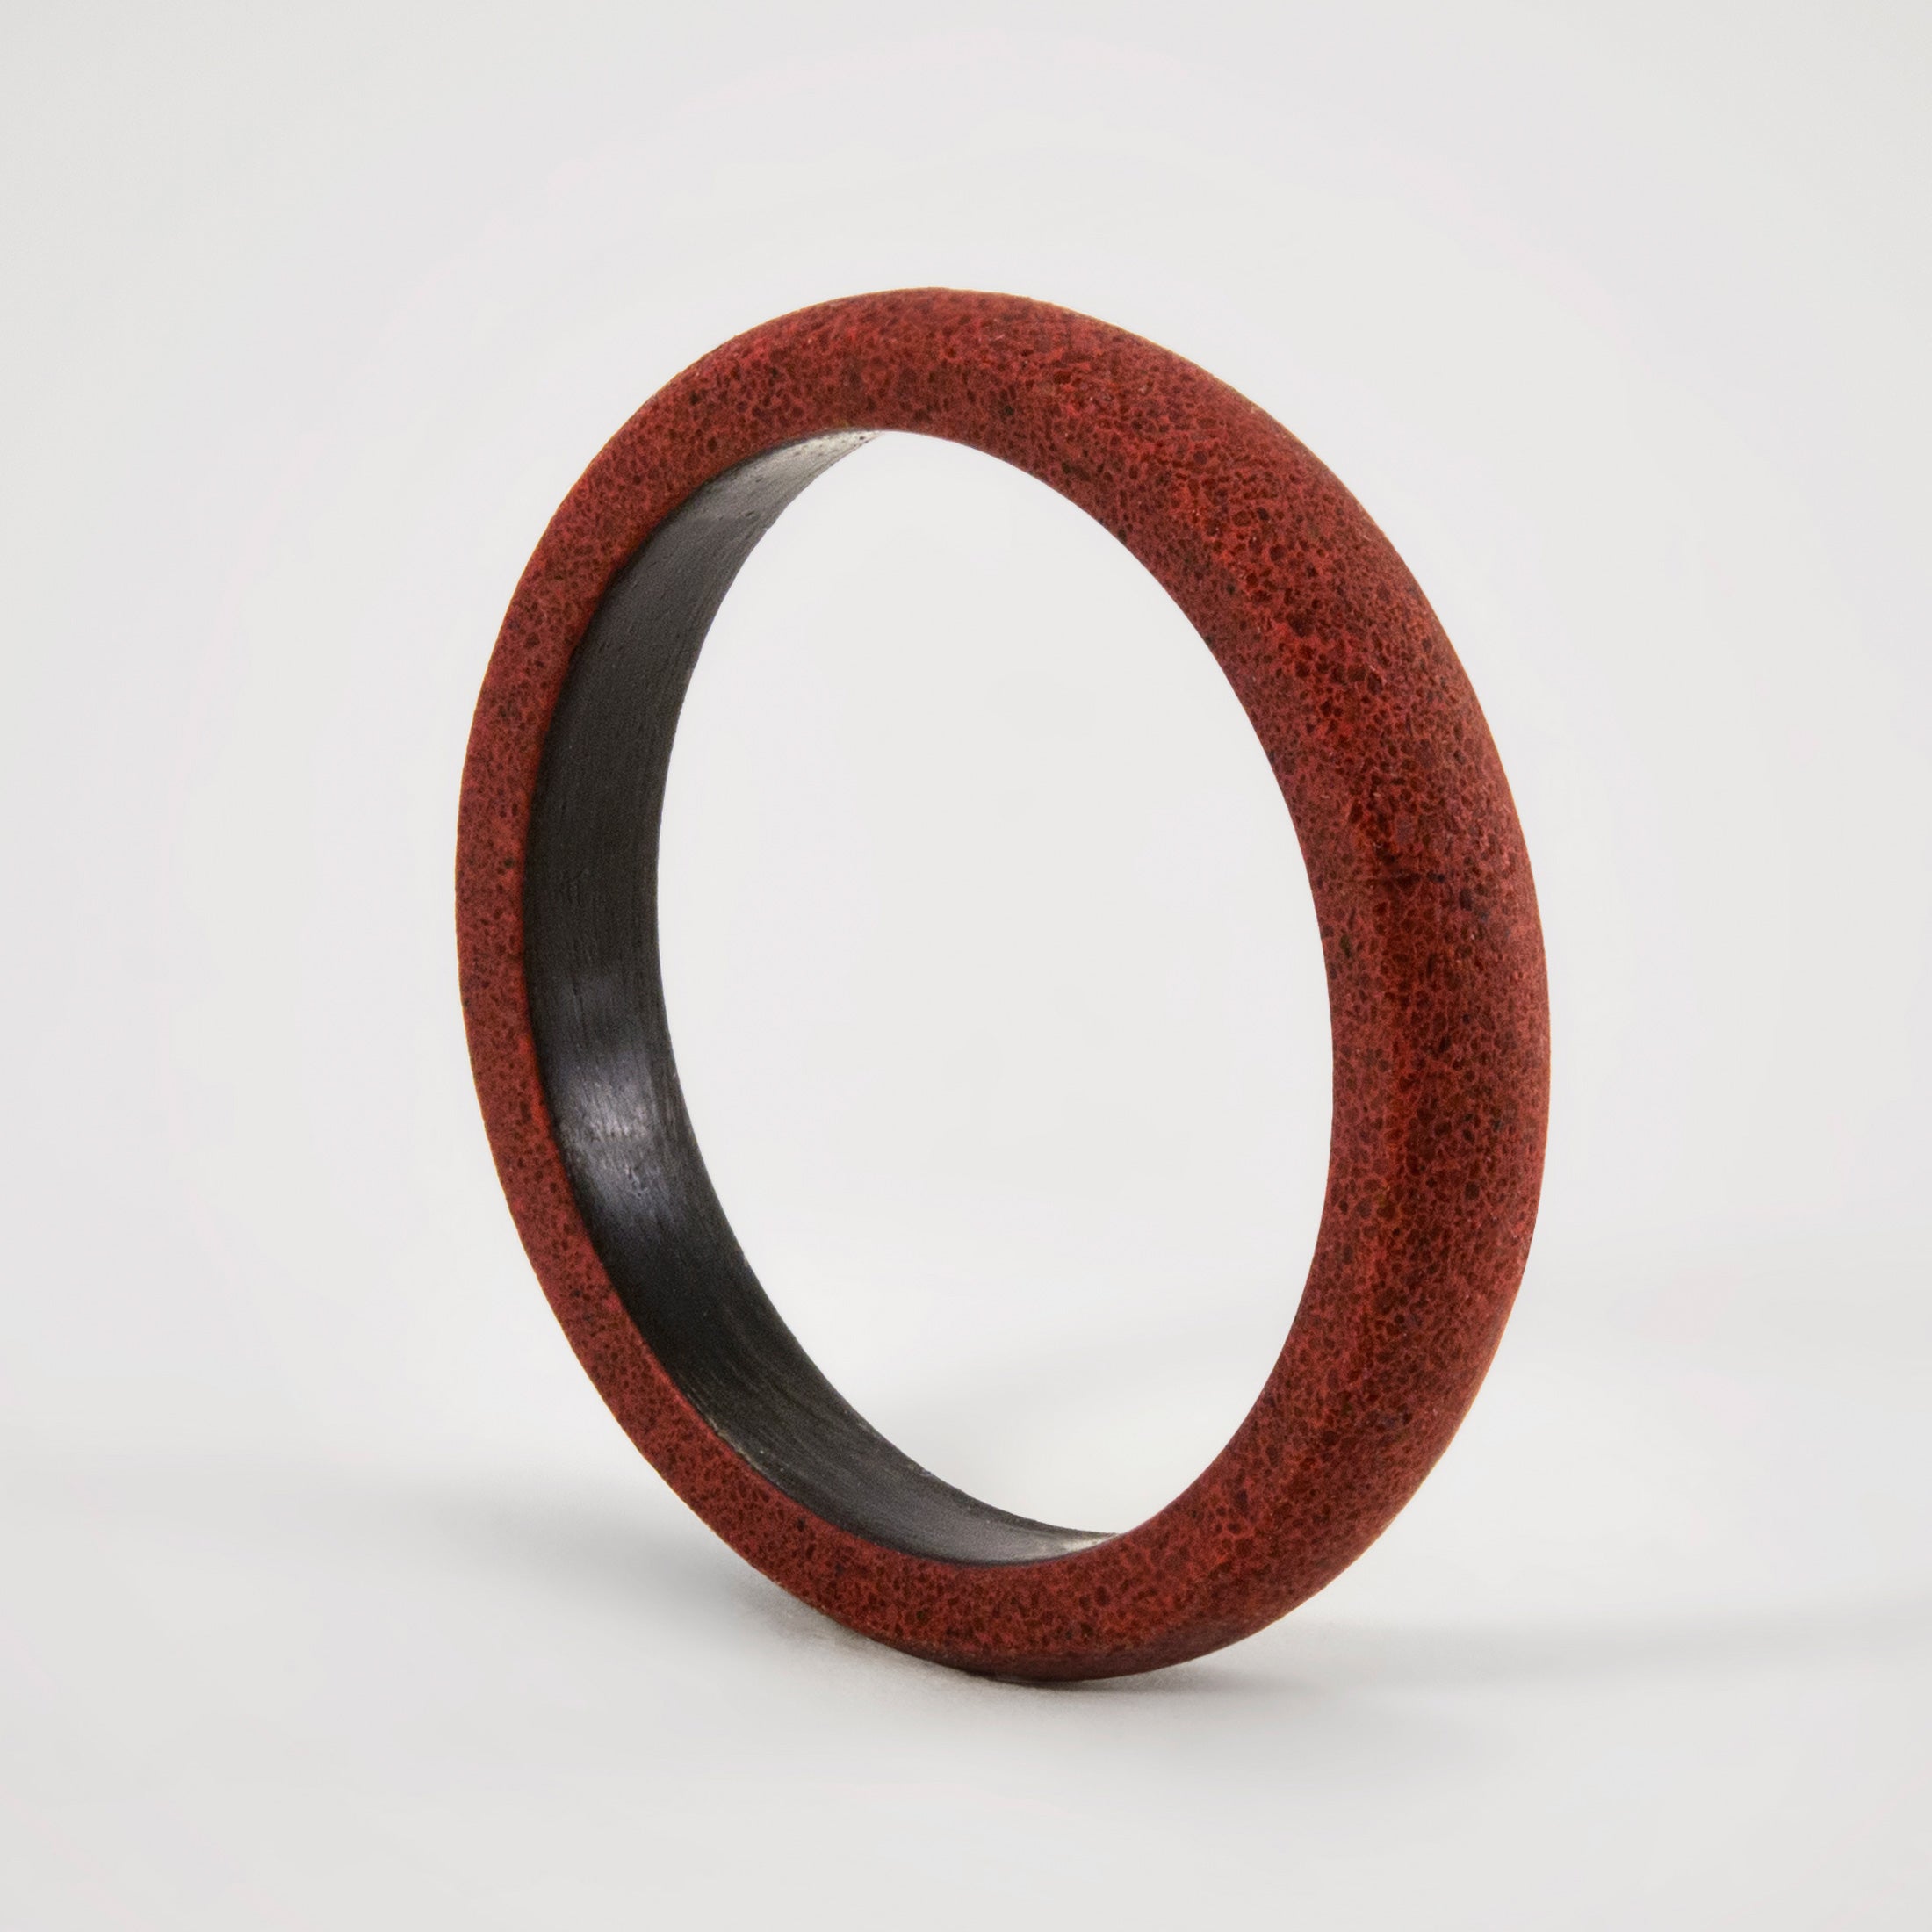 RED CONCRETE and CARBON FIBER ring